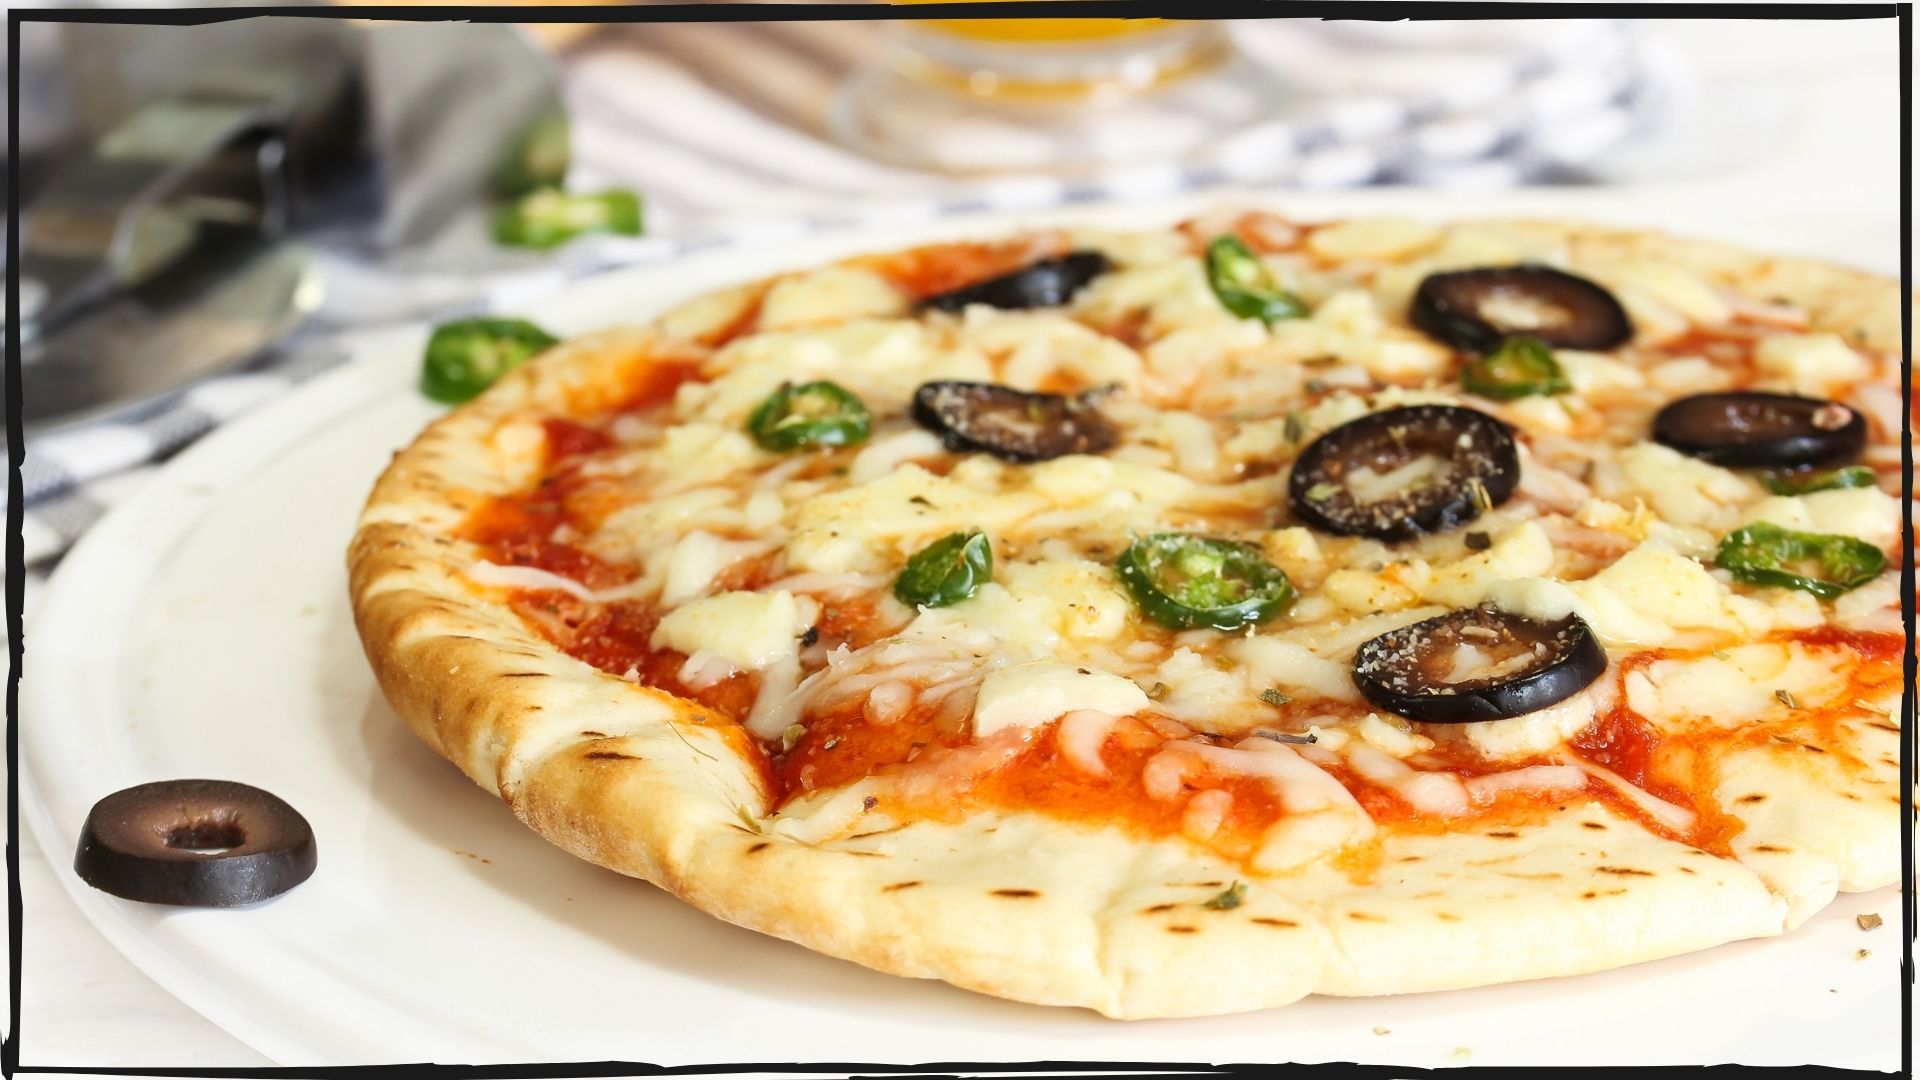 What Is The Most Popular Pizza Topping?